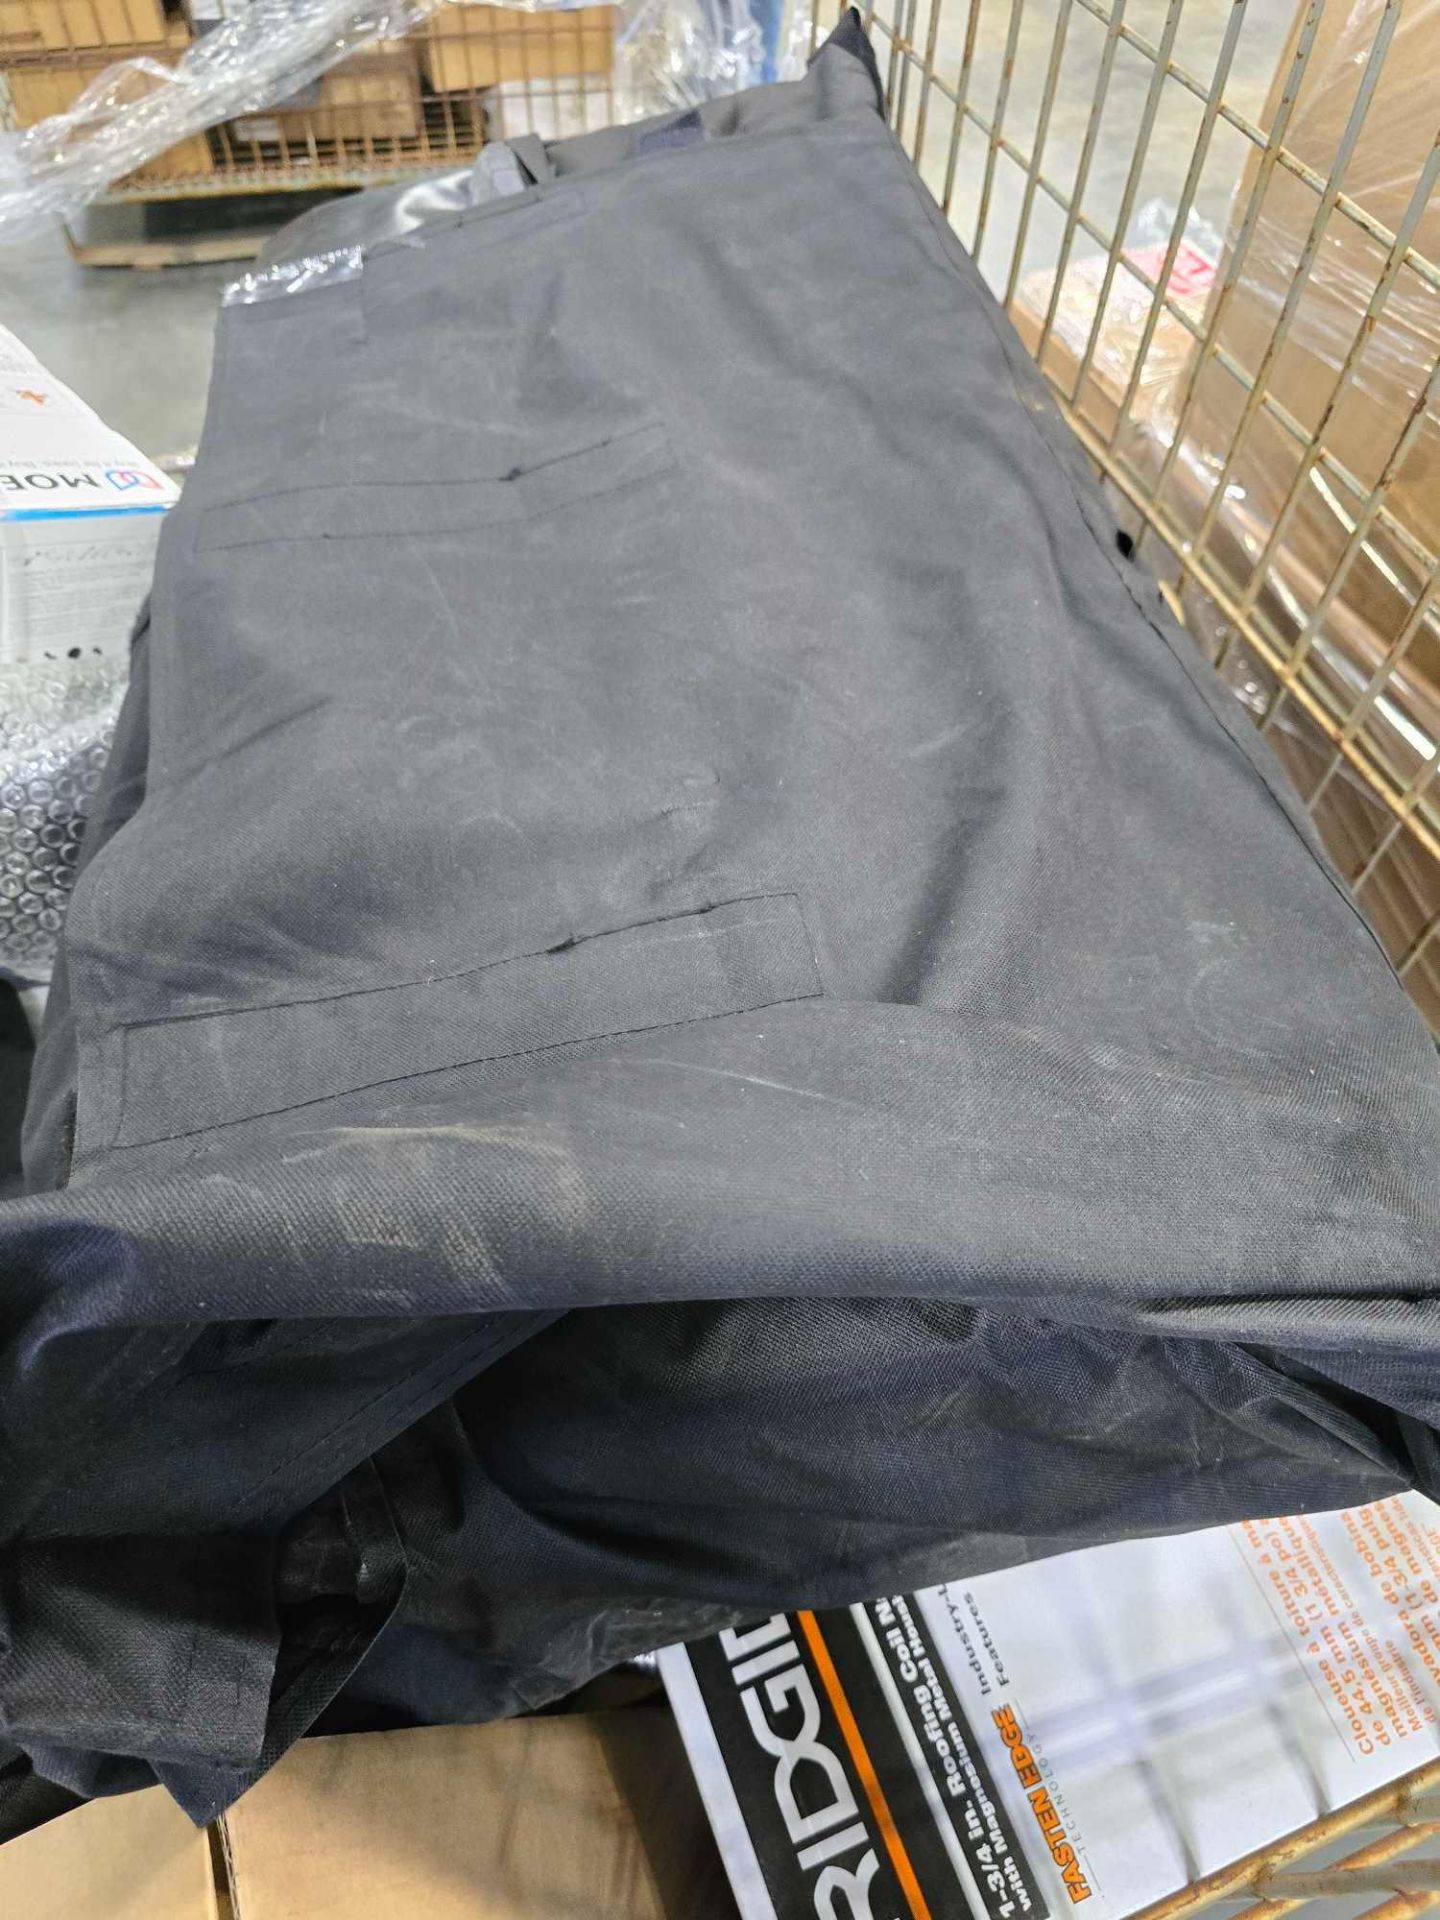 Large Tarp, Mone, Tires, Rope, Cable, Car parts, Rigid Nailer and more - Image 7 of 9